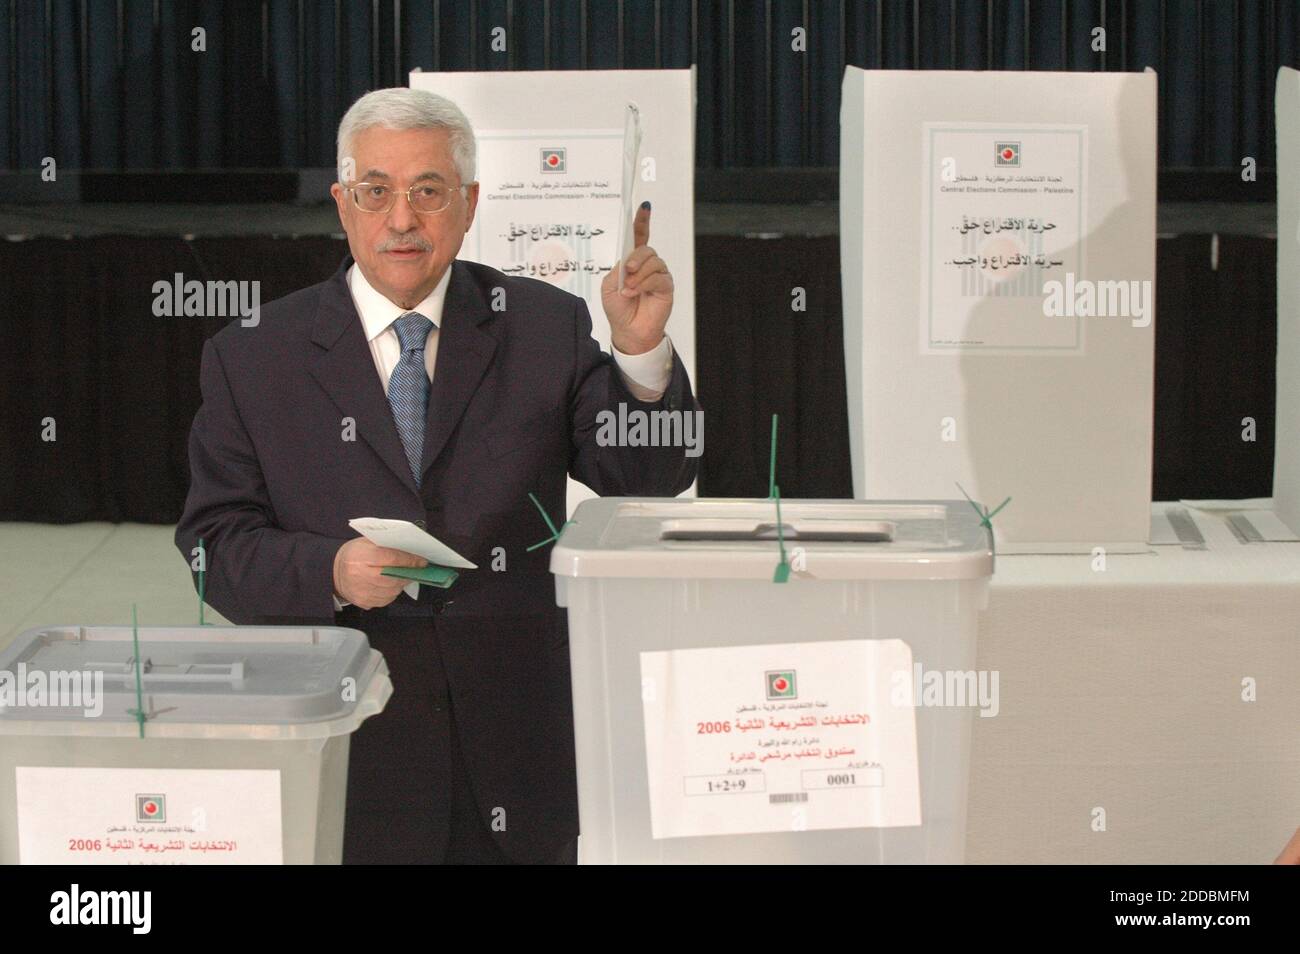 NO FILM, NO VIDEO, NO TV, NO DOCUMENTARY - In the West Bank town of Ramallah, Palestinian President Mahmoud Abbas, also known as Abu Mazen, shows his inked finger marking his vote in the Palestinian Parliamentary elections, January 25, 2006. Photo by Yossi Zamir/Flash 90/KRT/ABACAPRESS.COM Stock Photo